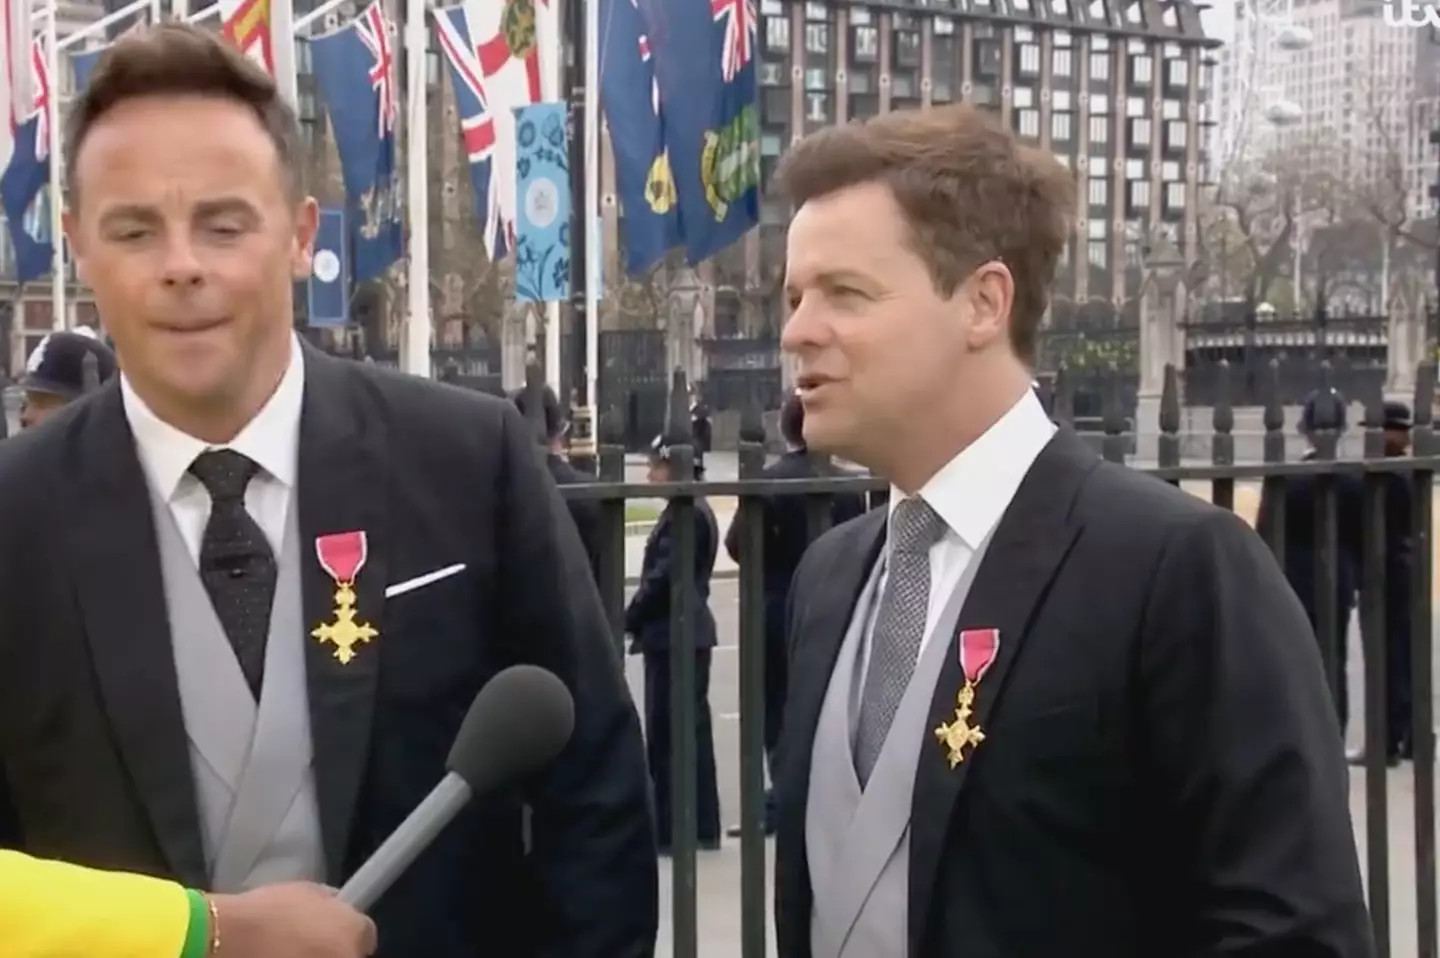 Ant and Dec are attending the coronation ceremony.